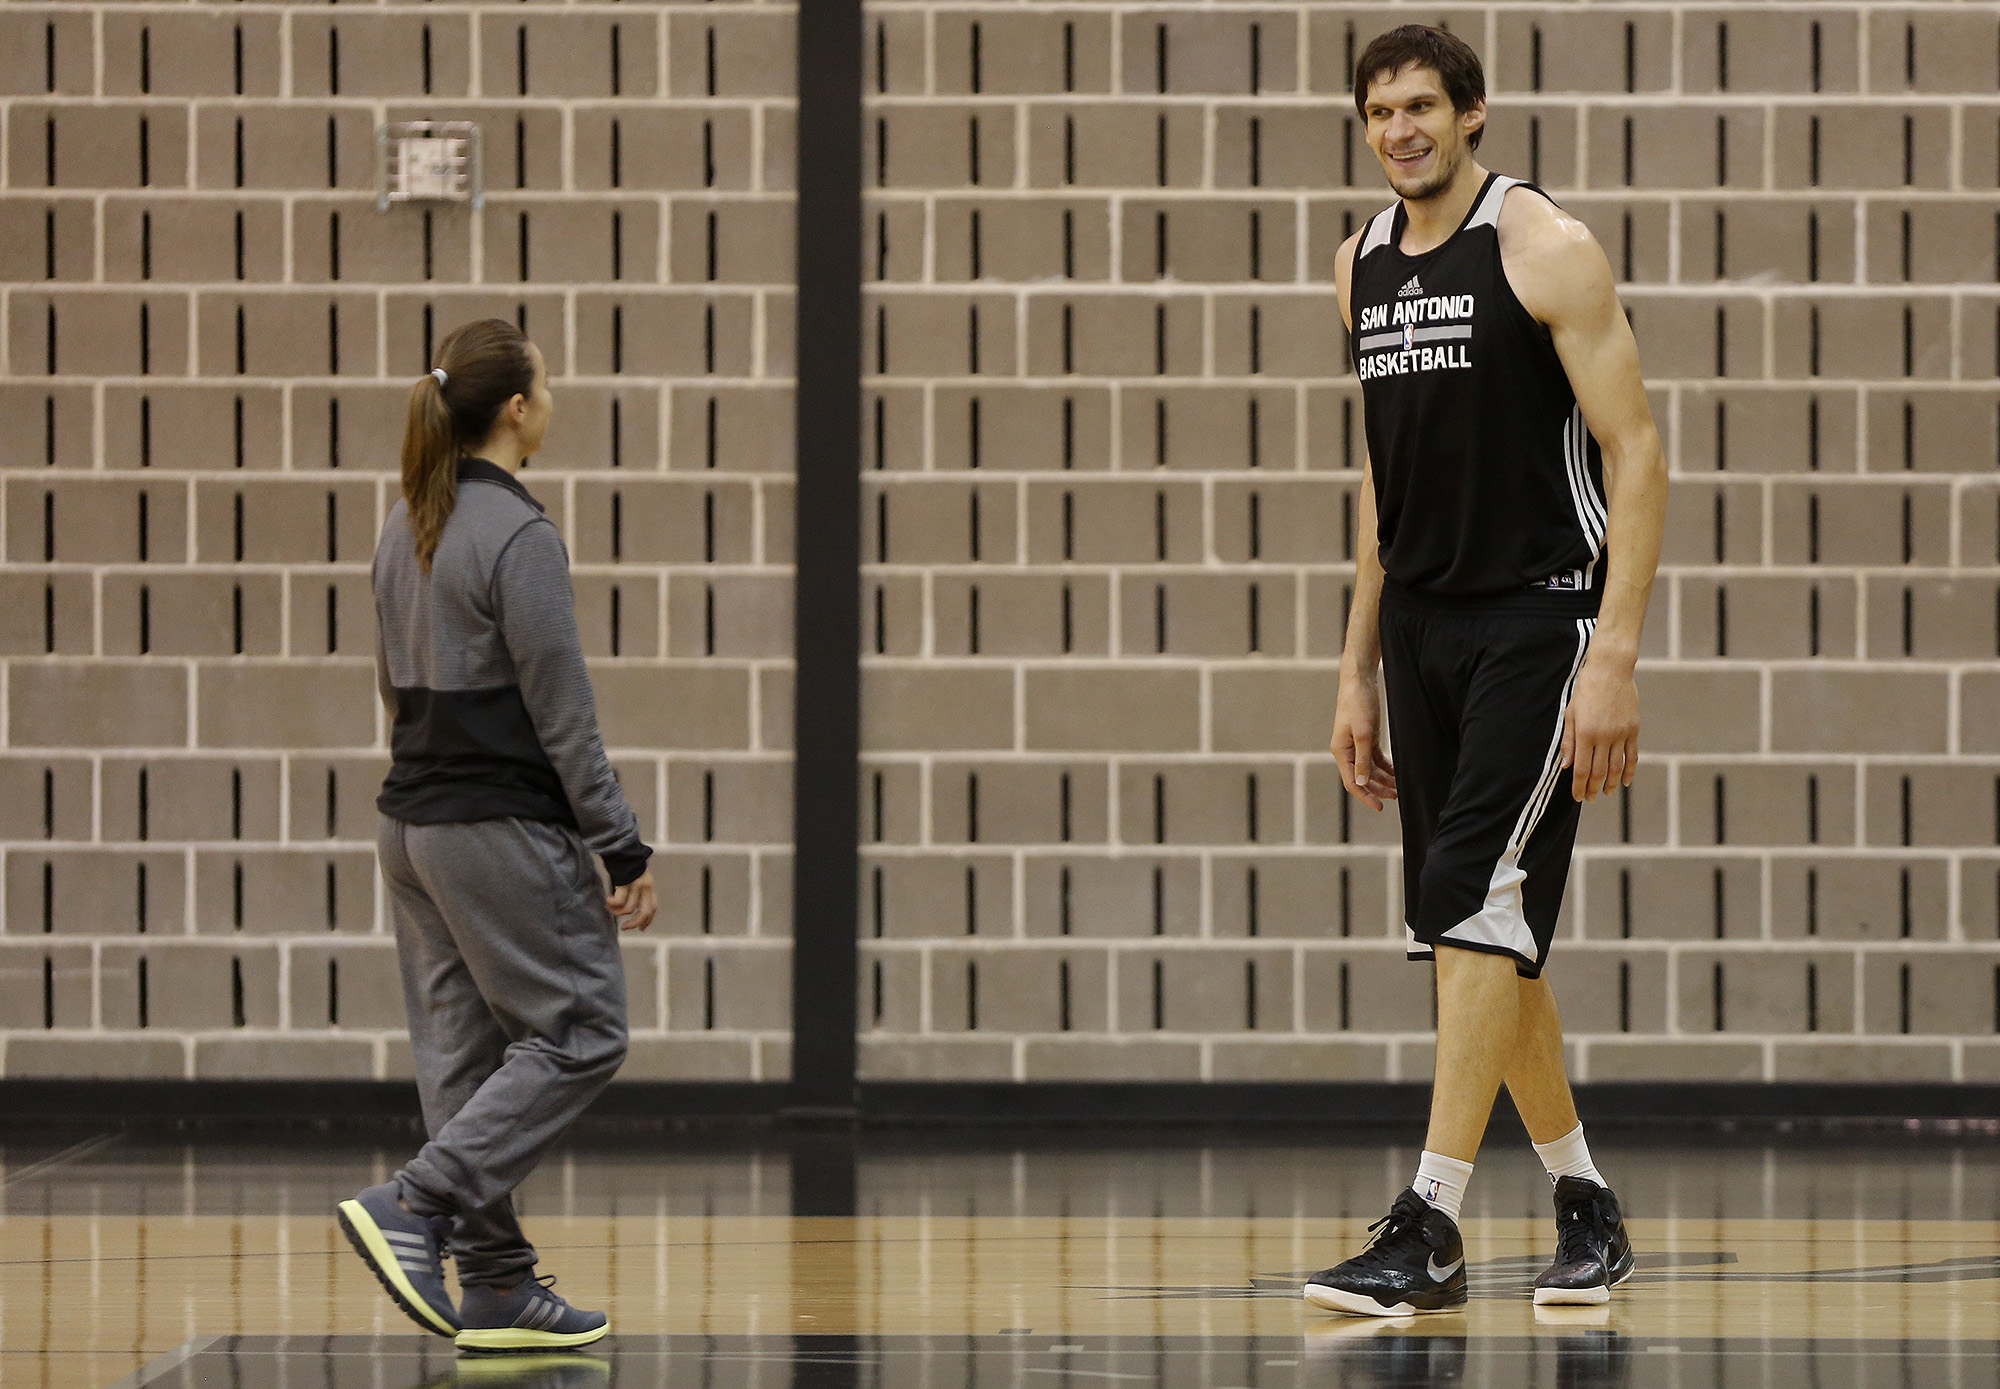 Report: Spurs extend qualifying offer to Boban Marjanovic